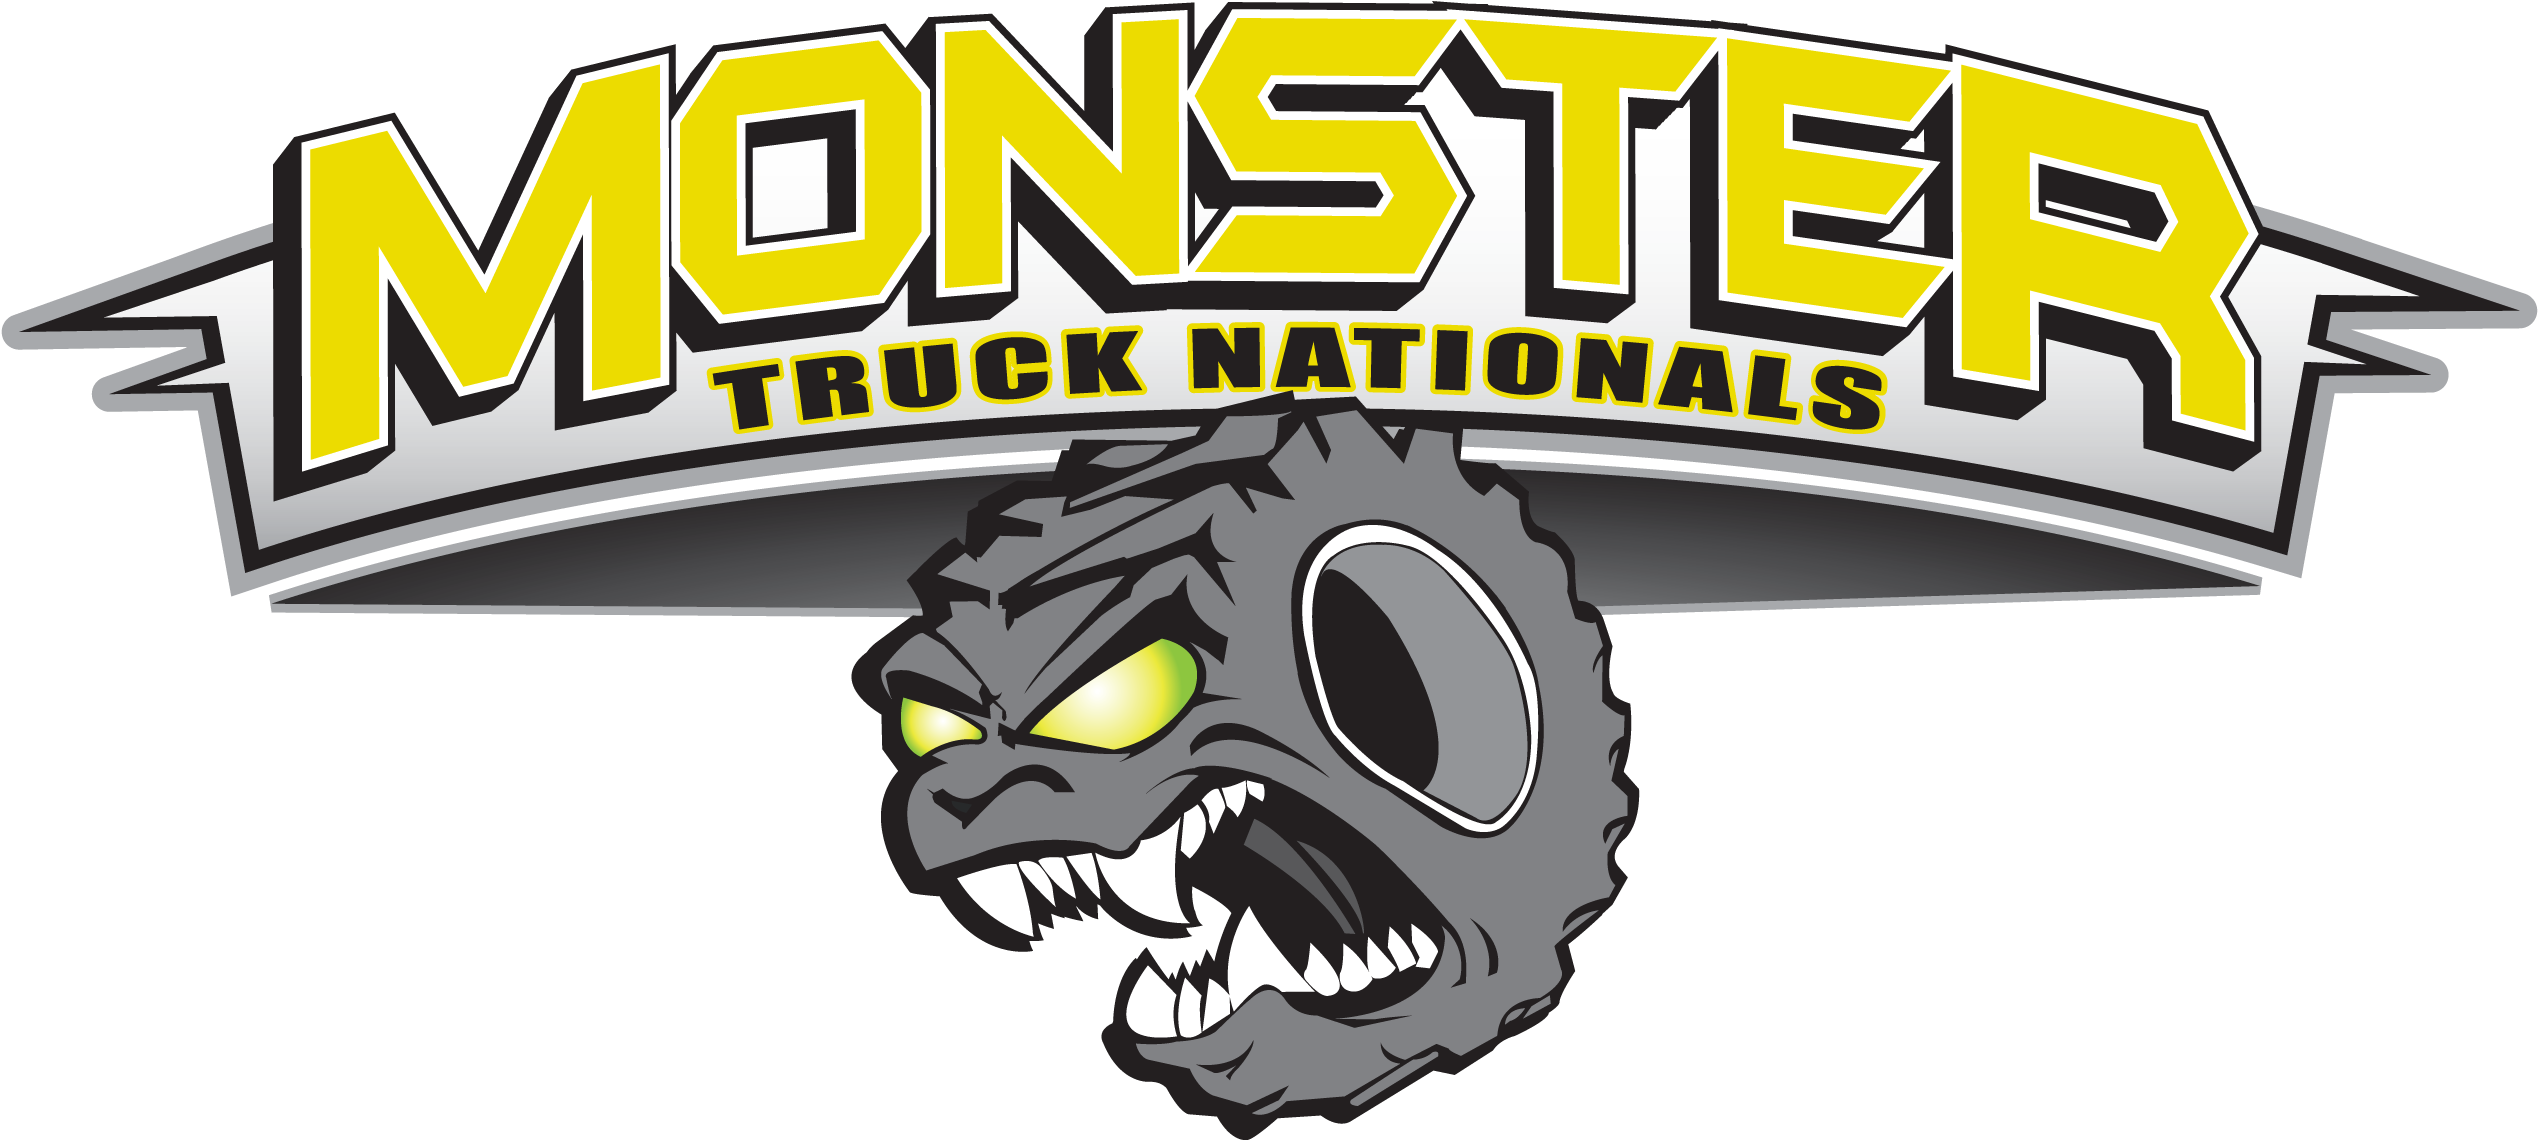 The Monster Truck Nationals Wants You And Your Family - Monster Nationals (2679x1251)